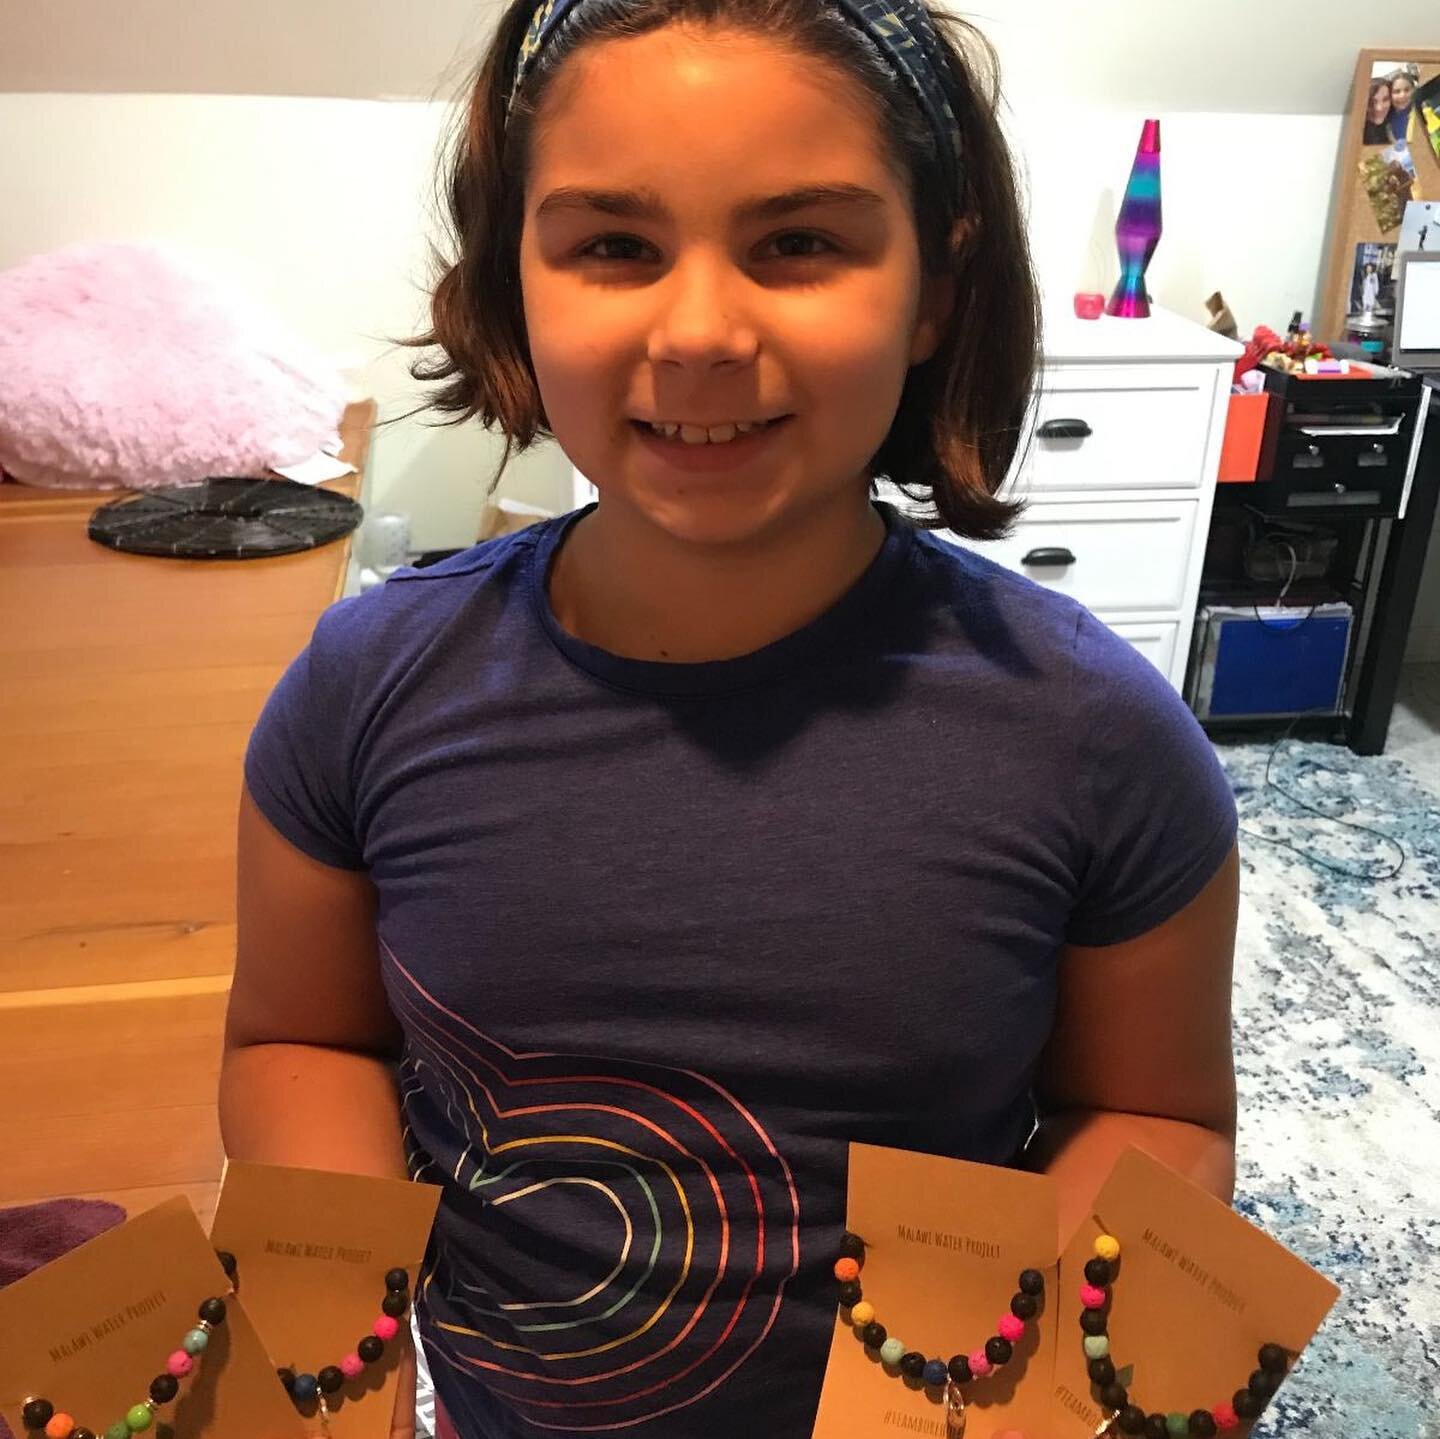 Kate, an inspiring 9 year old girl from California, has taught us just how much difference one child can make by deciding to take action. Her story is an amazing example of charity and love for humankind around the world.

While at summer camp, Kate 